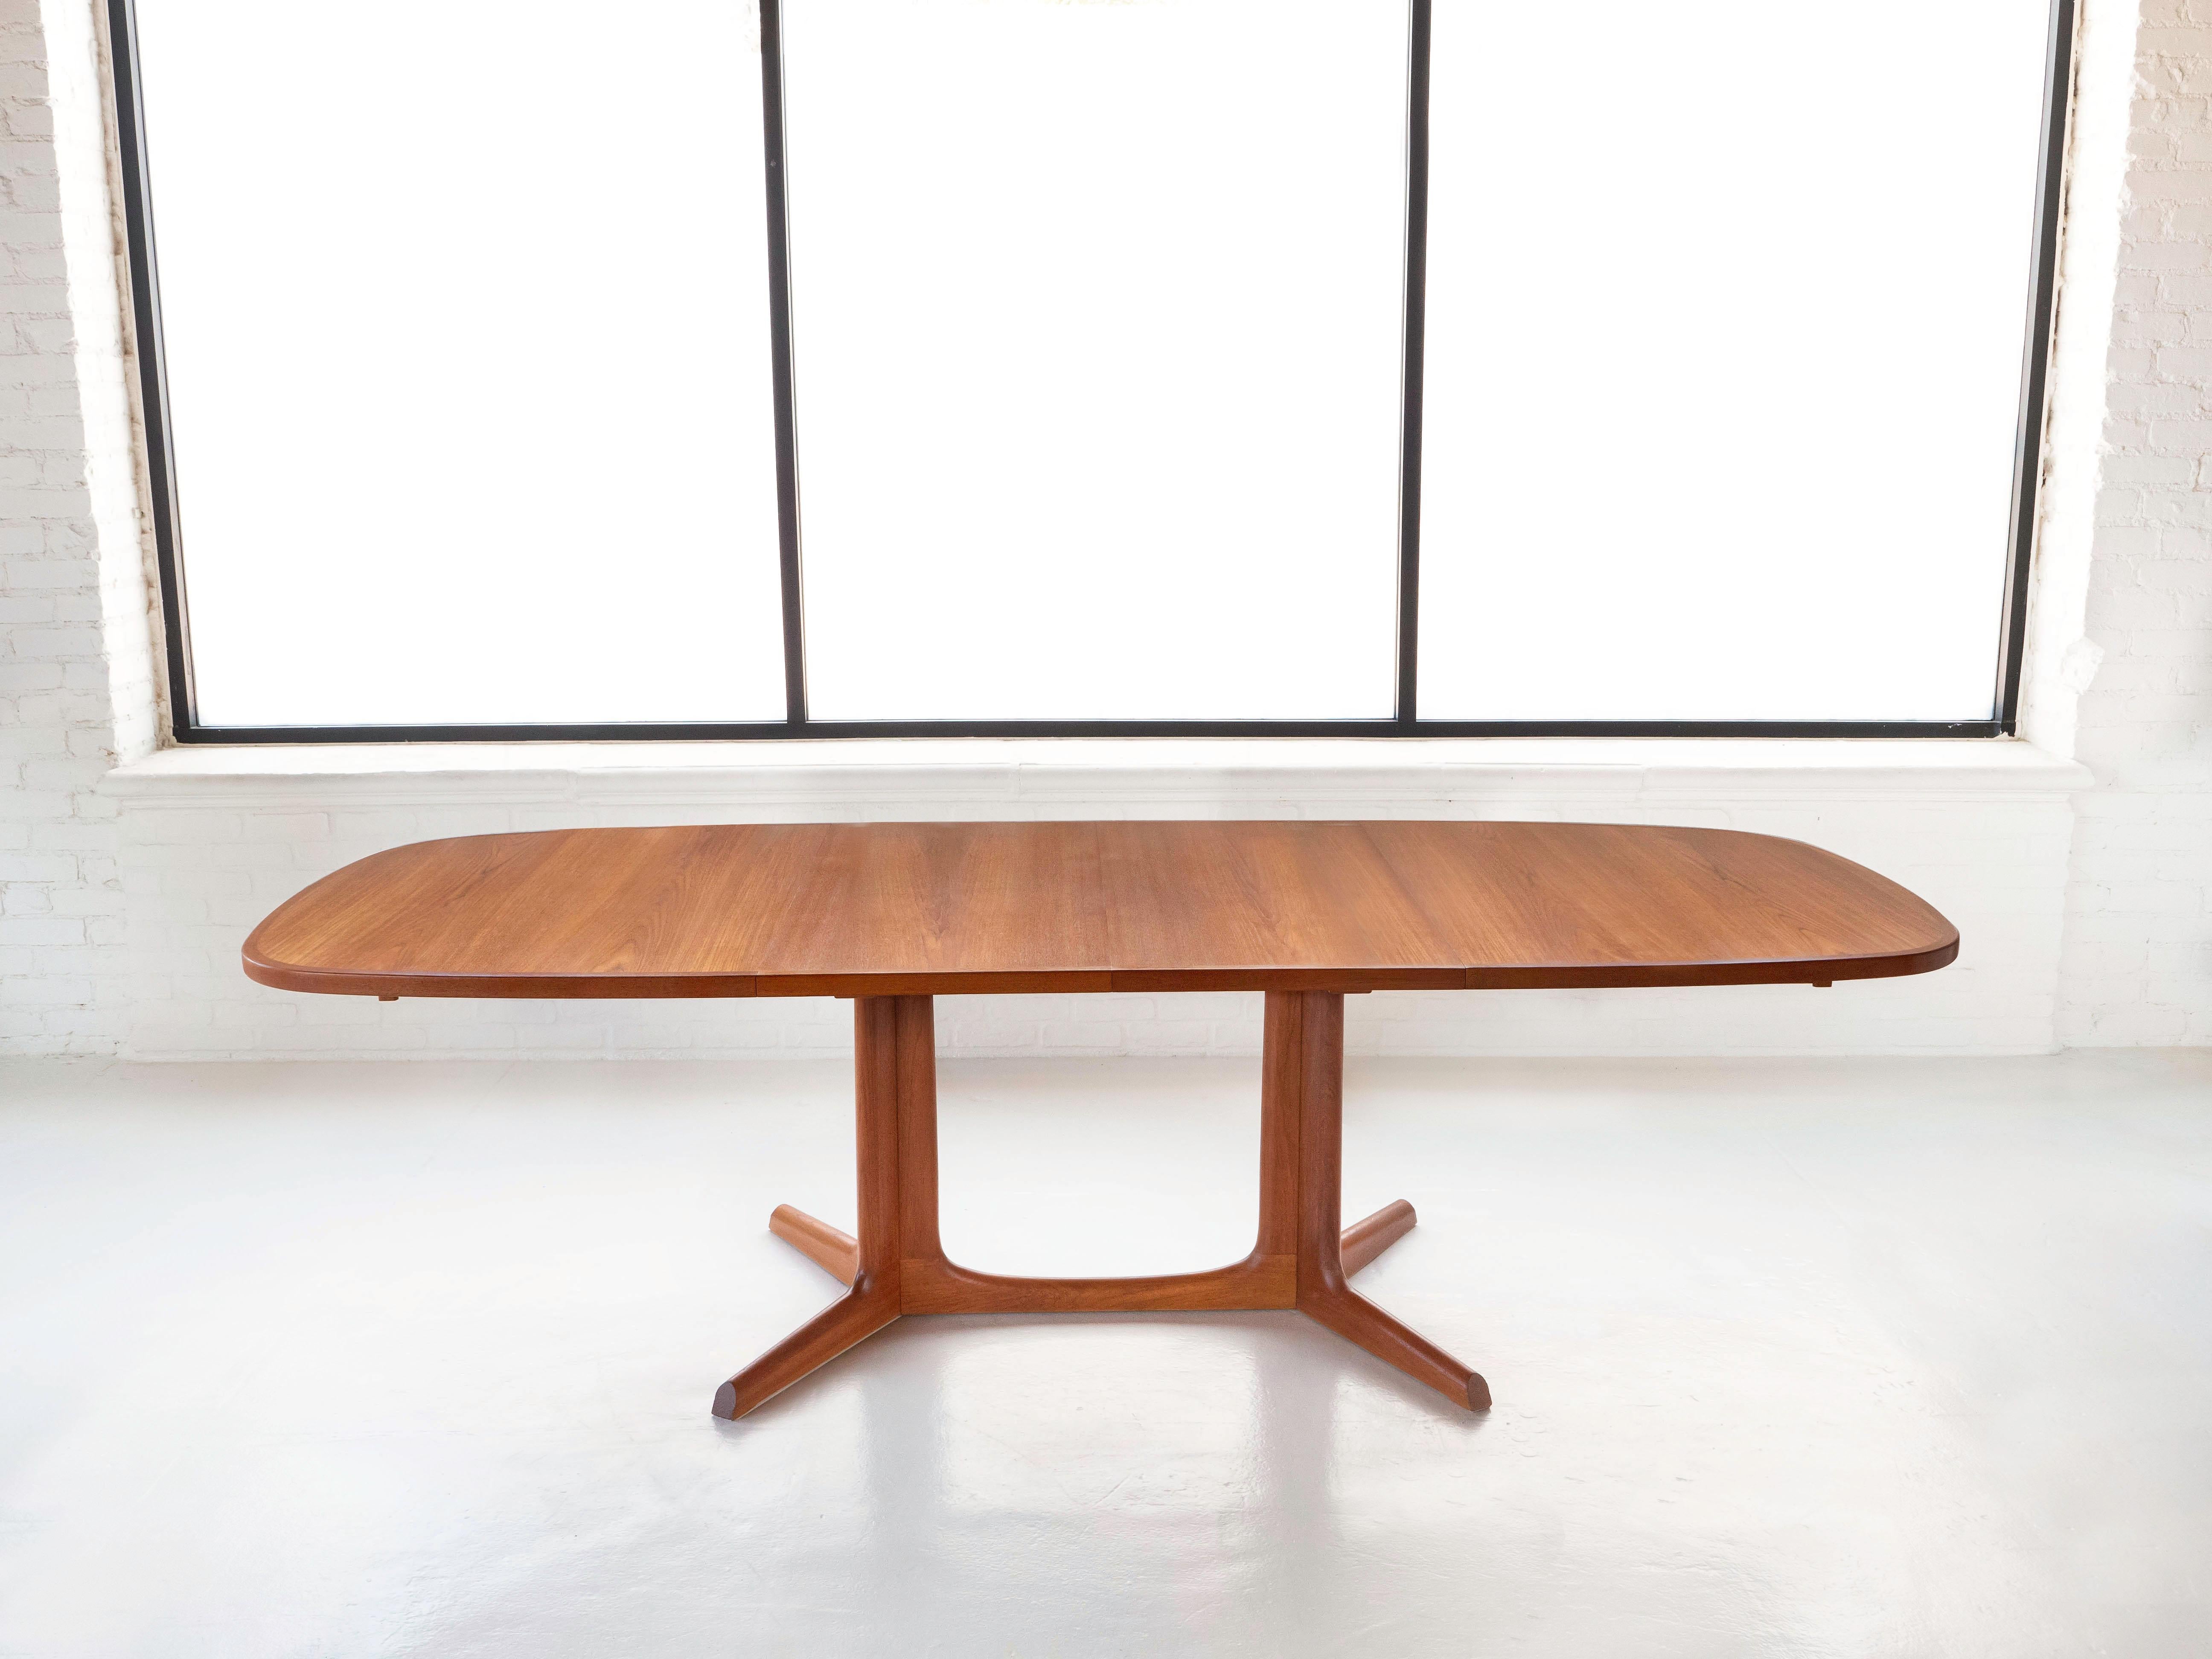 Teak dining table with two leaves by designer Niels O. Moller for company Gudme Mobelfabrik. Made in Denmark circa 1960's. The tables leaves can be stored beneath the table when not in use. This table is an earlier version than many of the others